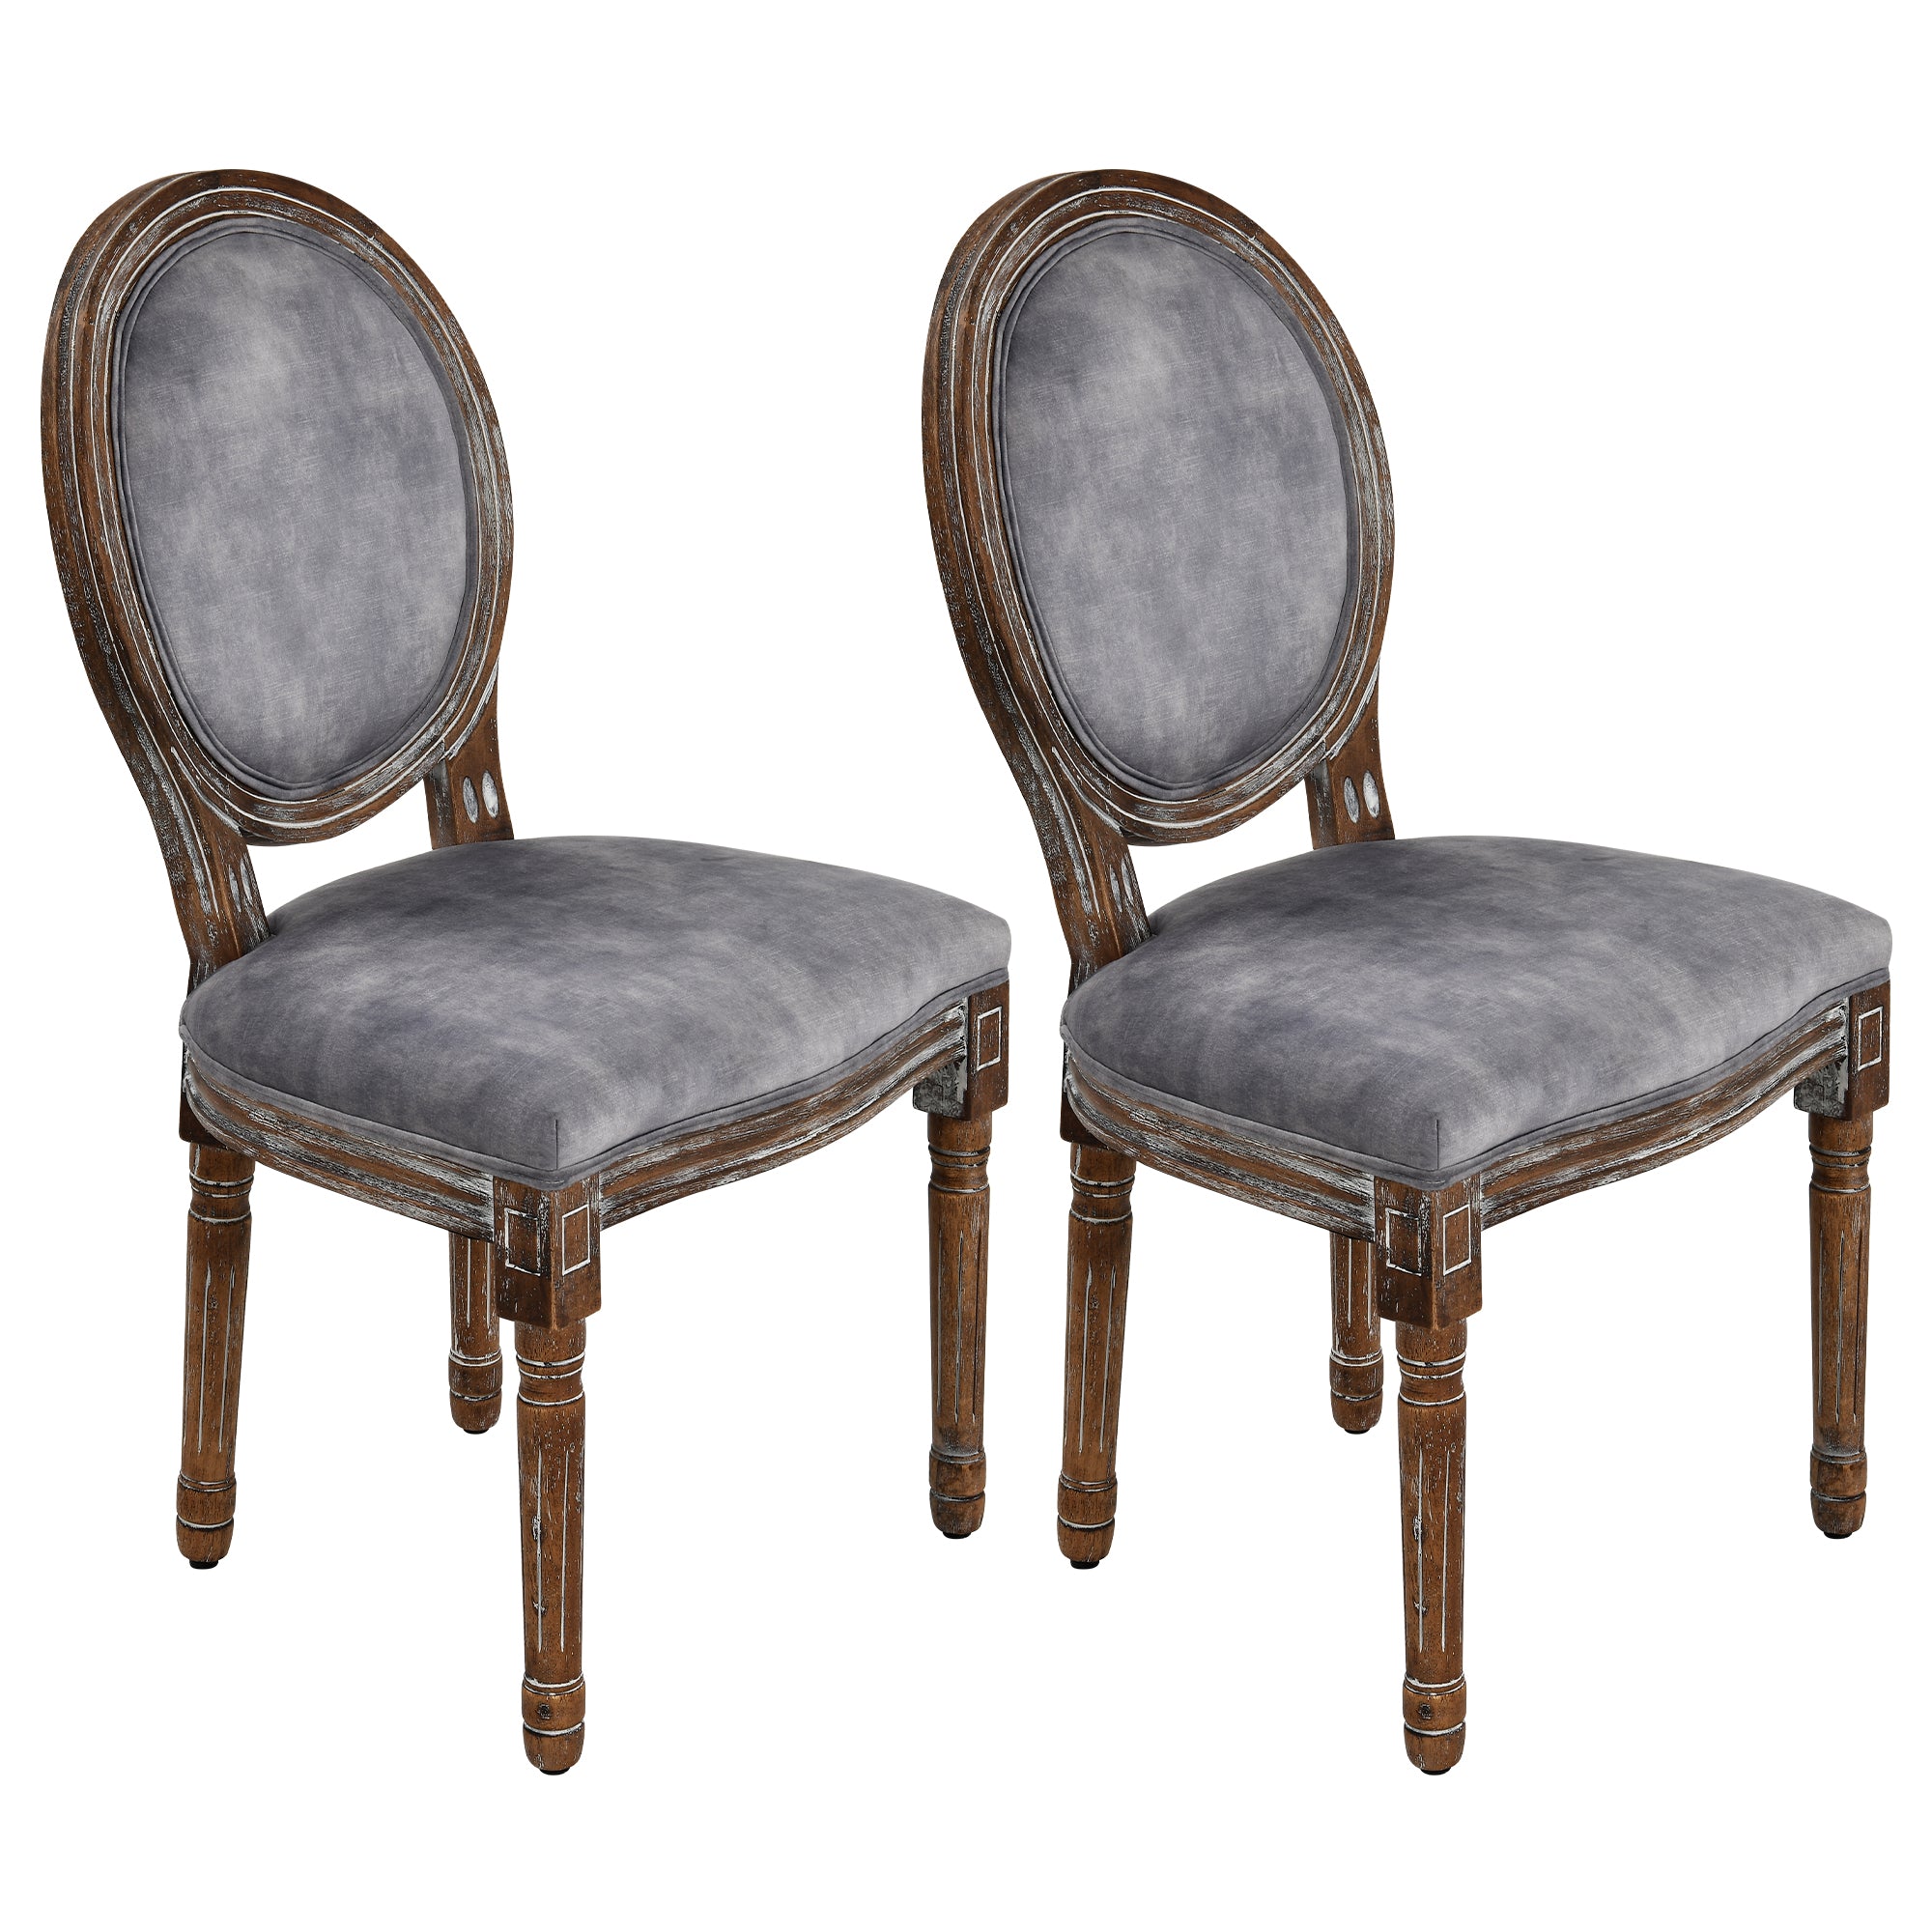 Margaux French Country Dining Chairs with Solid Wood Fluted Legs, Latte/Grey